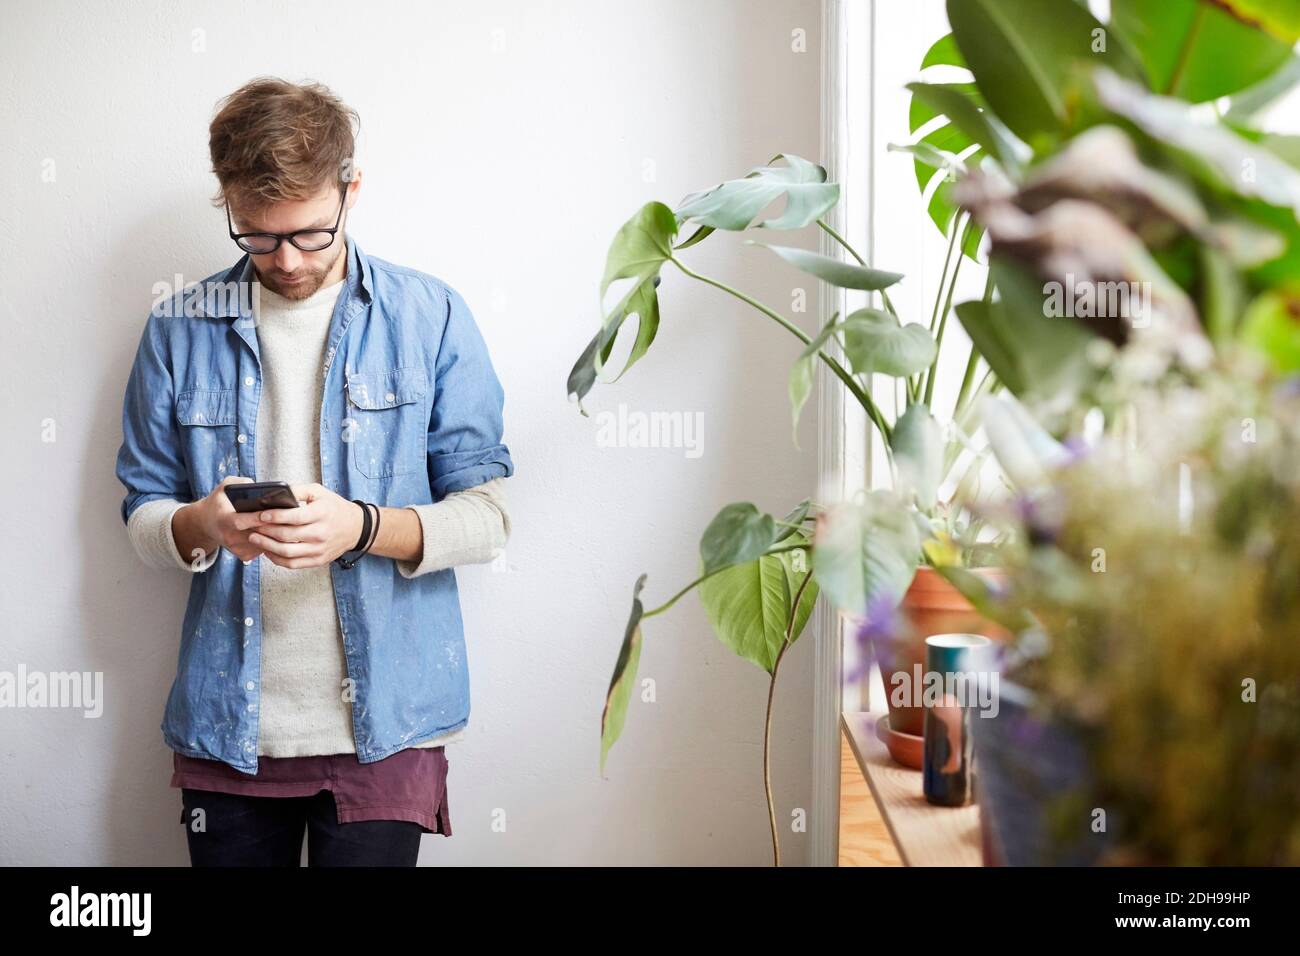 Young man using mobile phone against wall in art studio Stock Photo